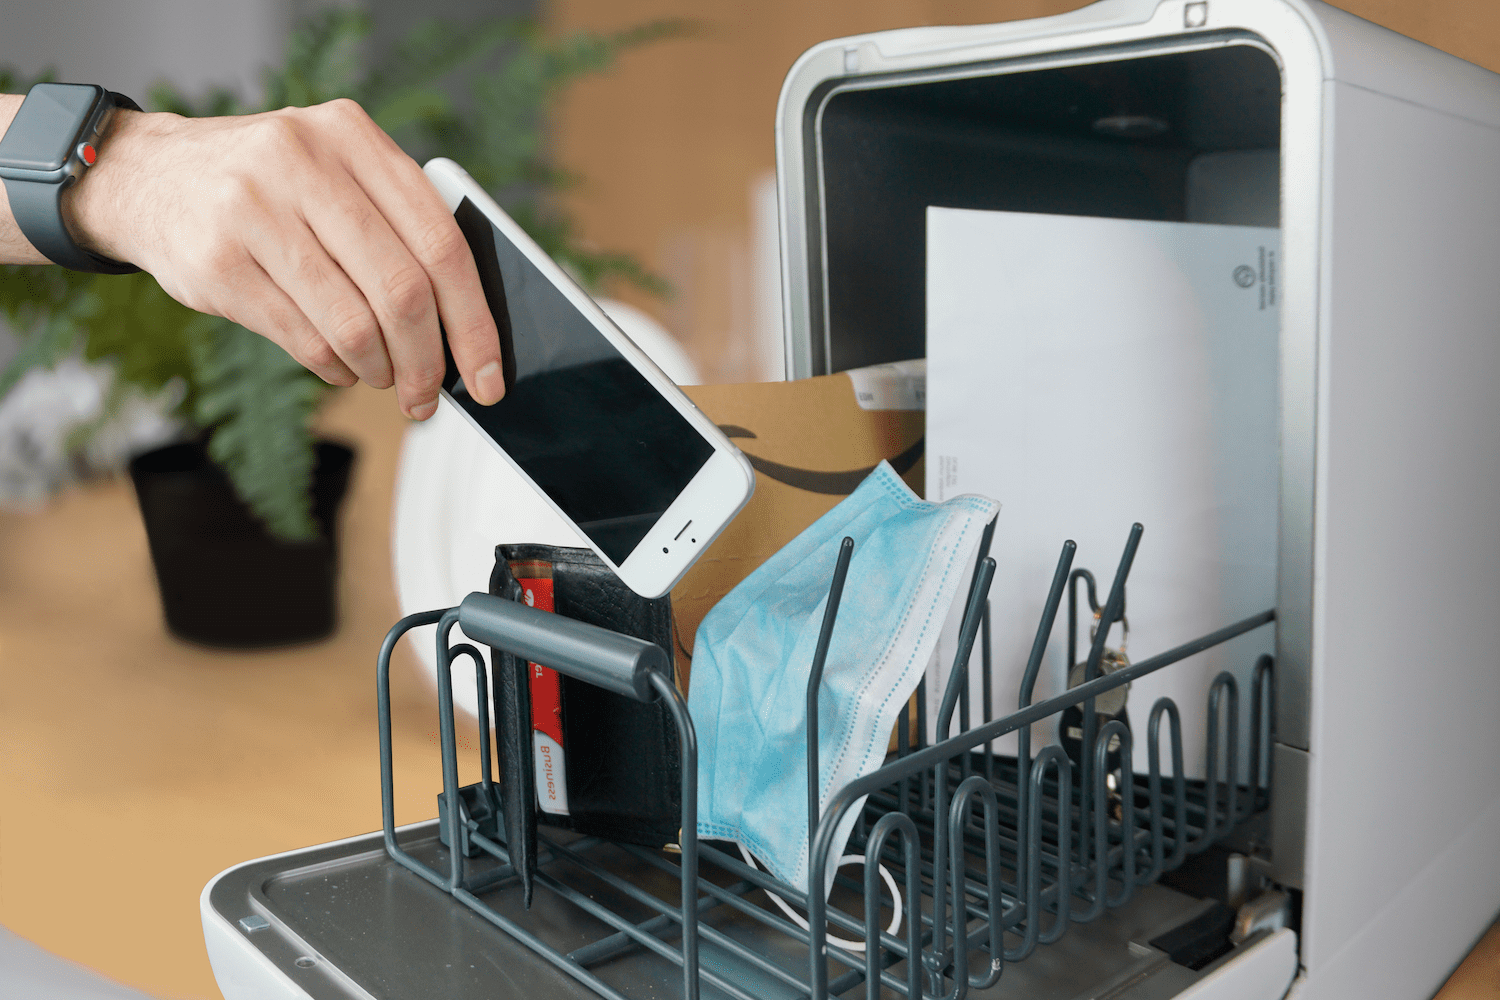 Capsule Personal Dishwasher by Loch Electronics